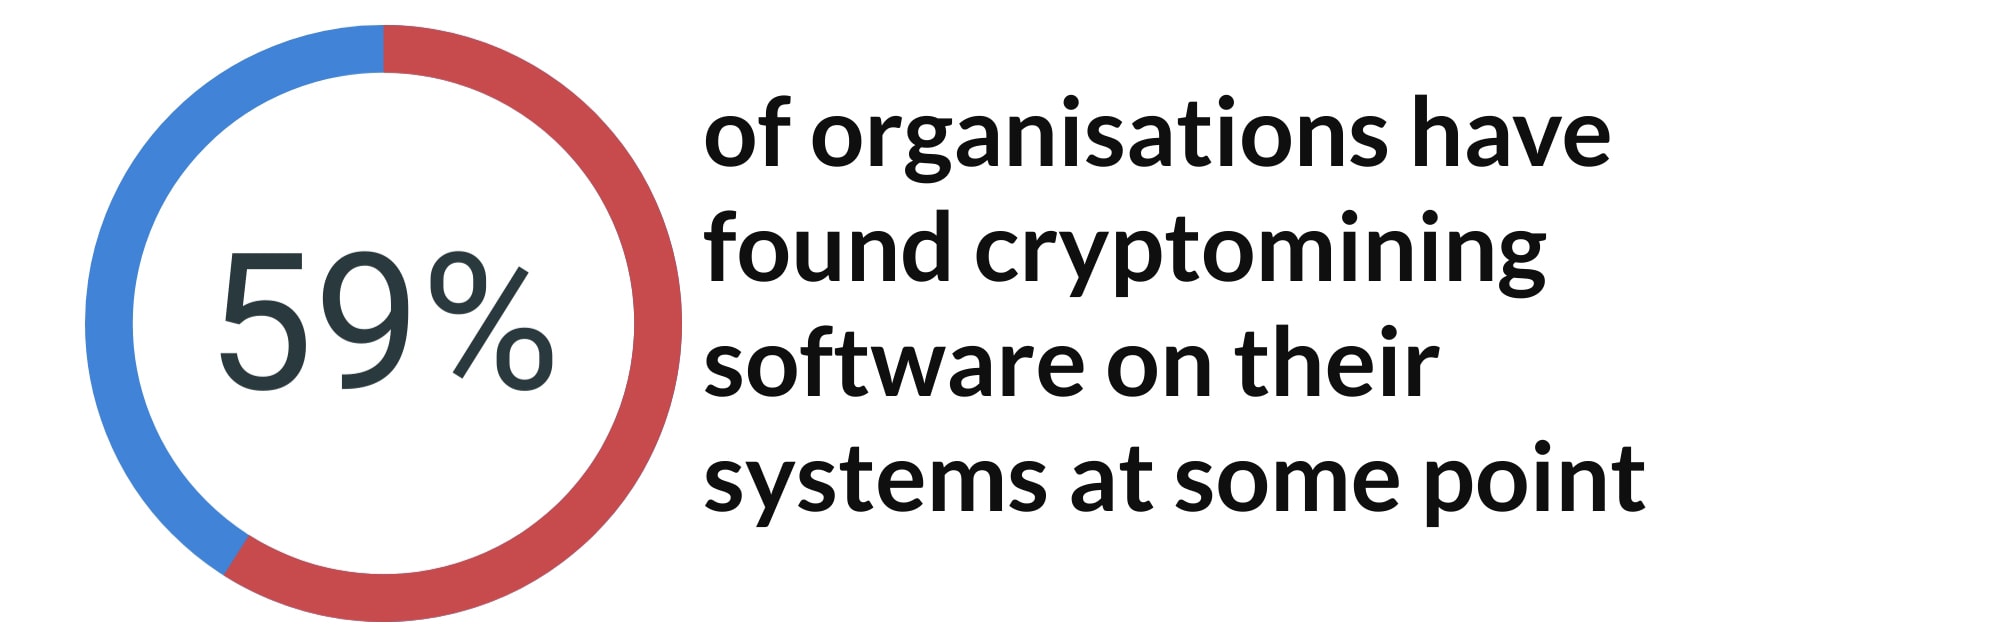 Graphic showing percentage of organisations that have detected cryptomining software